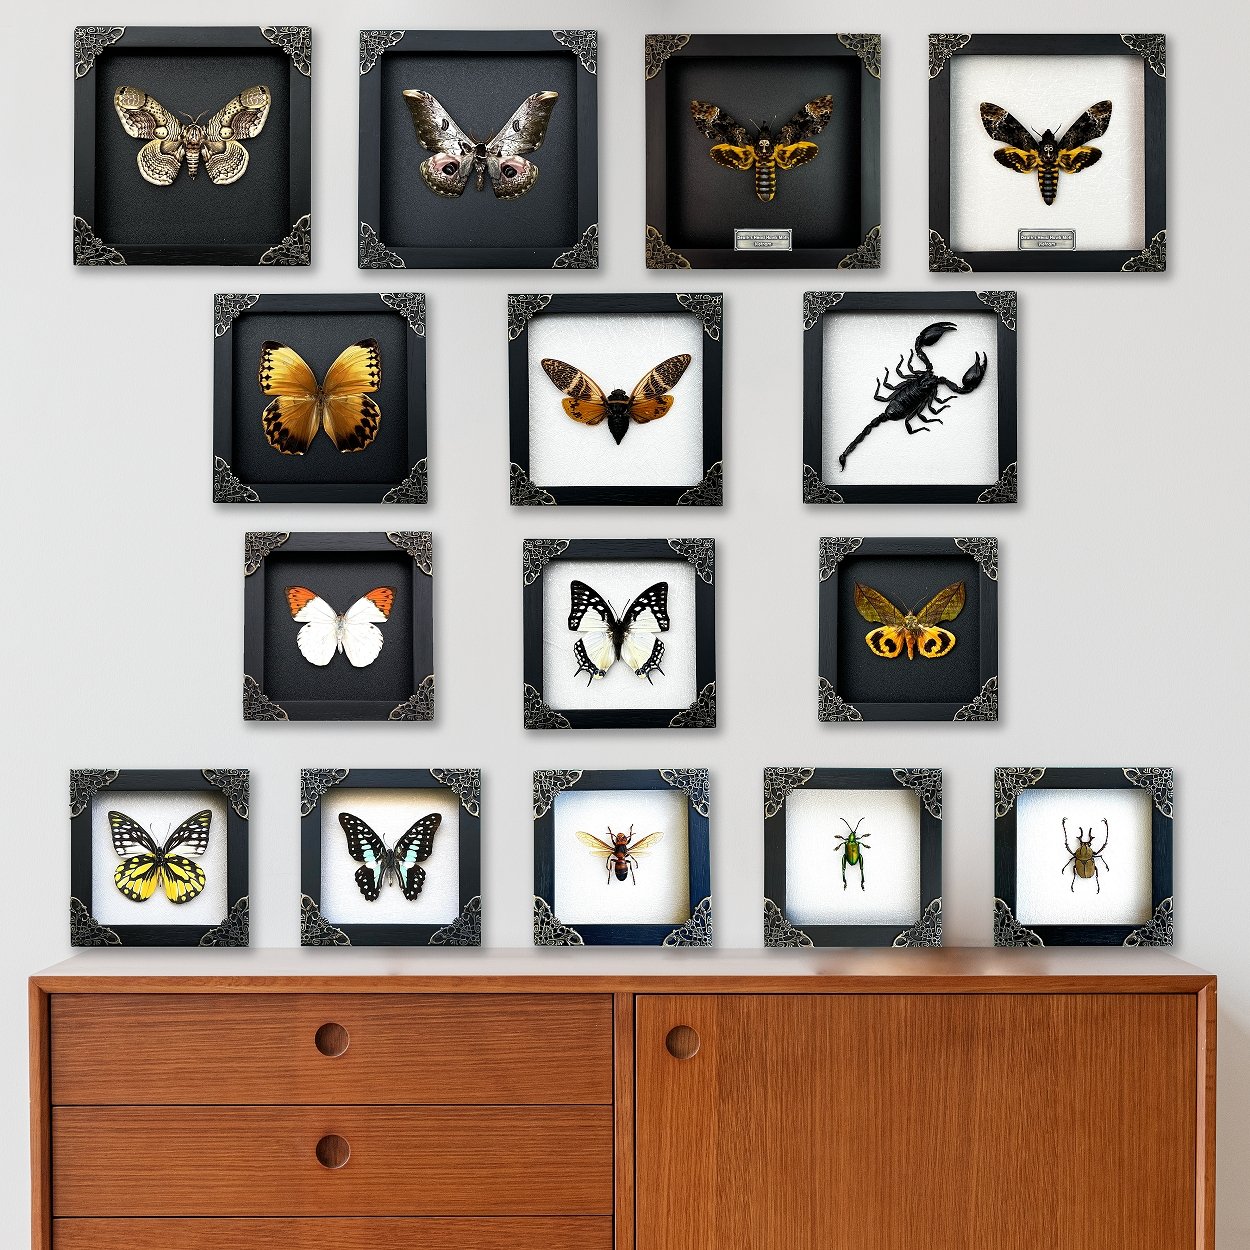 Real Framed Butterfly White Wooden Frame Shadow Box Dried Great Nawab Insect Taxidermy Taxadermy Specimen Display Wall Art Hanging Home Decor - Vinacreations